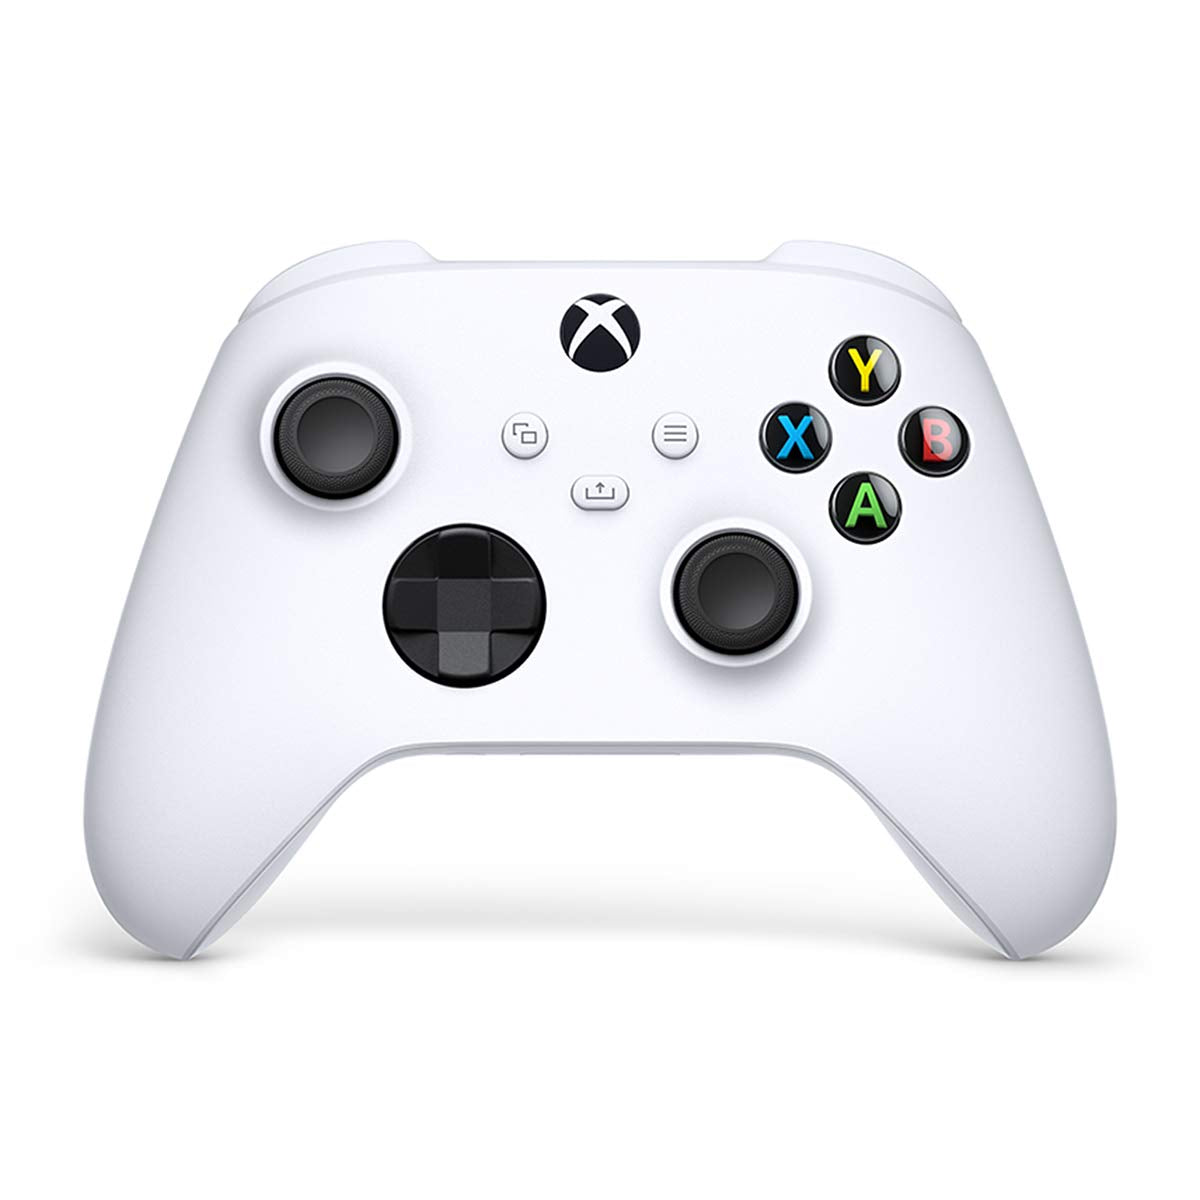 Microsoft Xbox Series S Console Fortnite Rocket League with Extra Controller Bundle - Robot White - Pro-Distributing